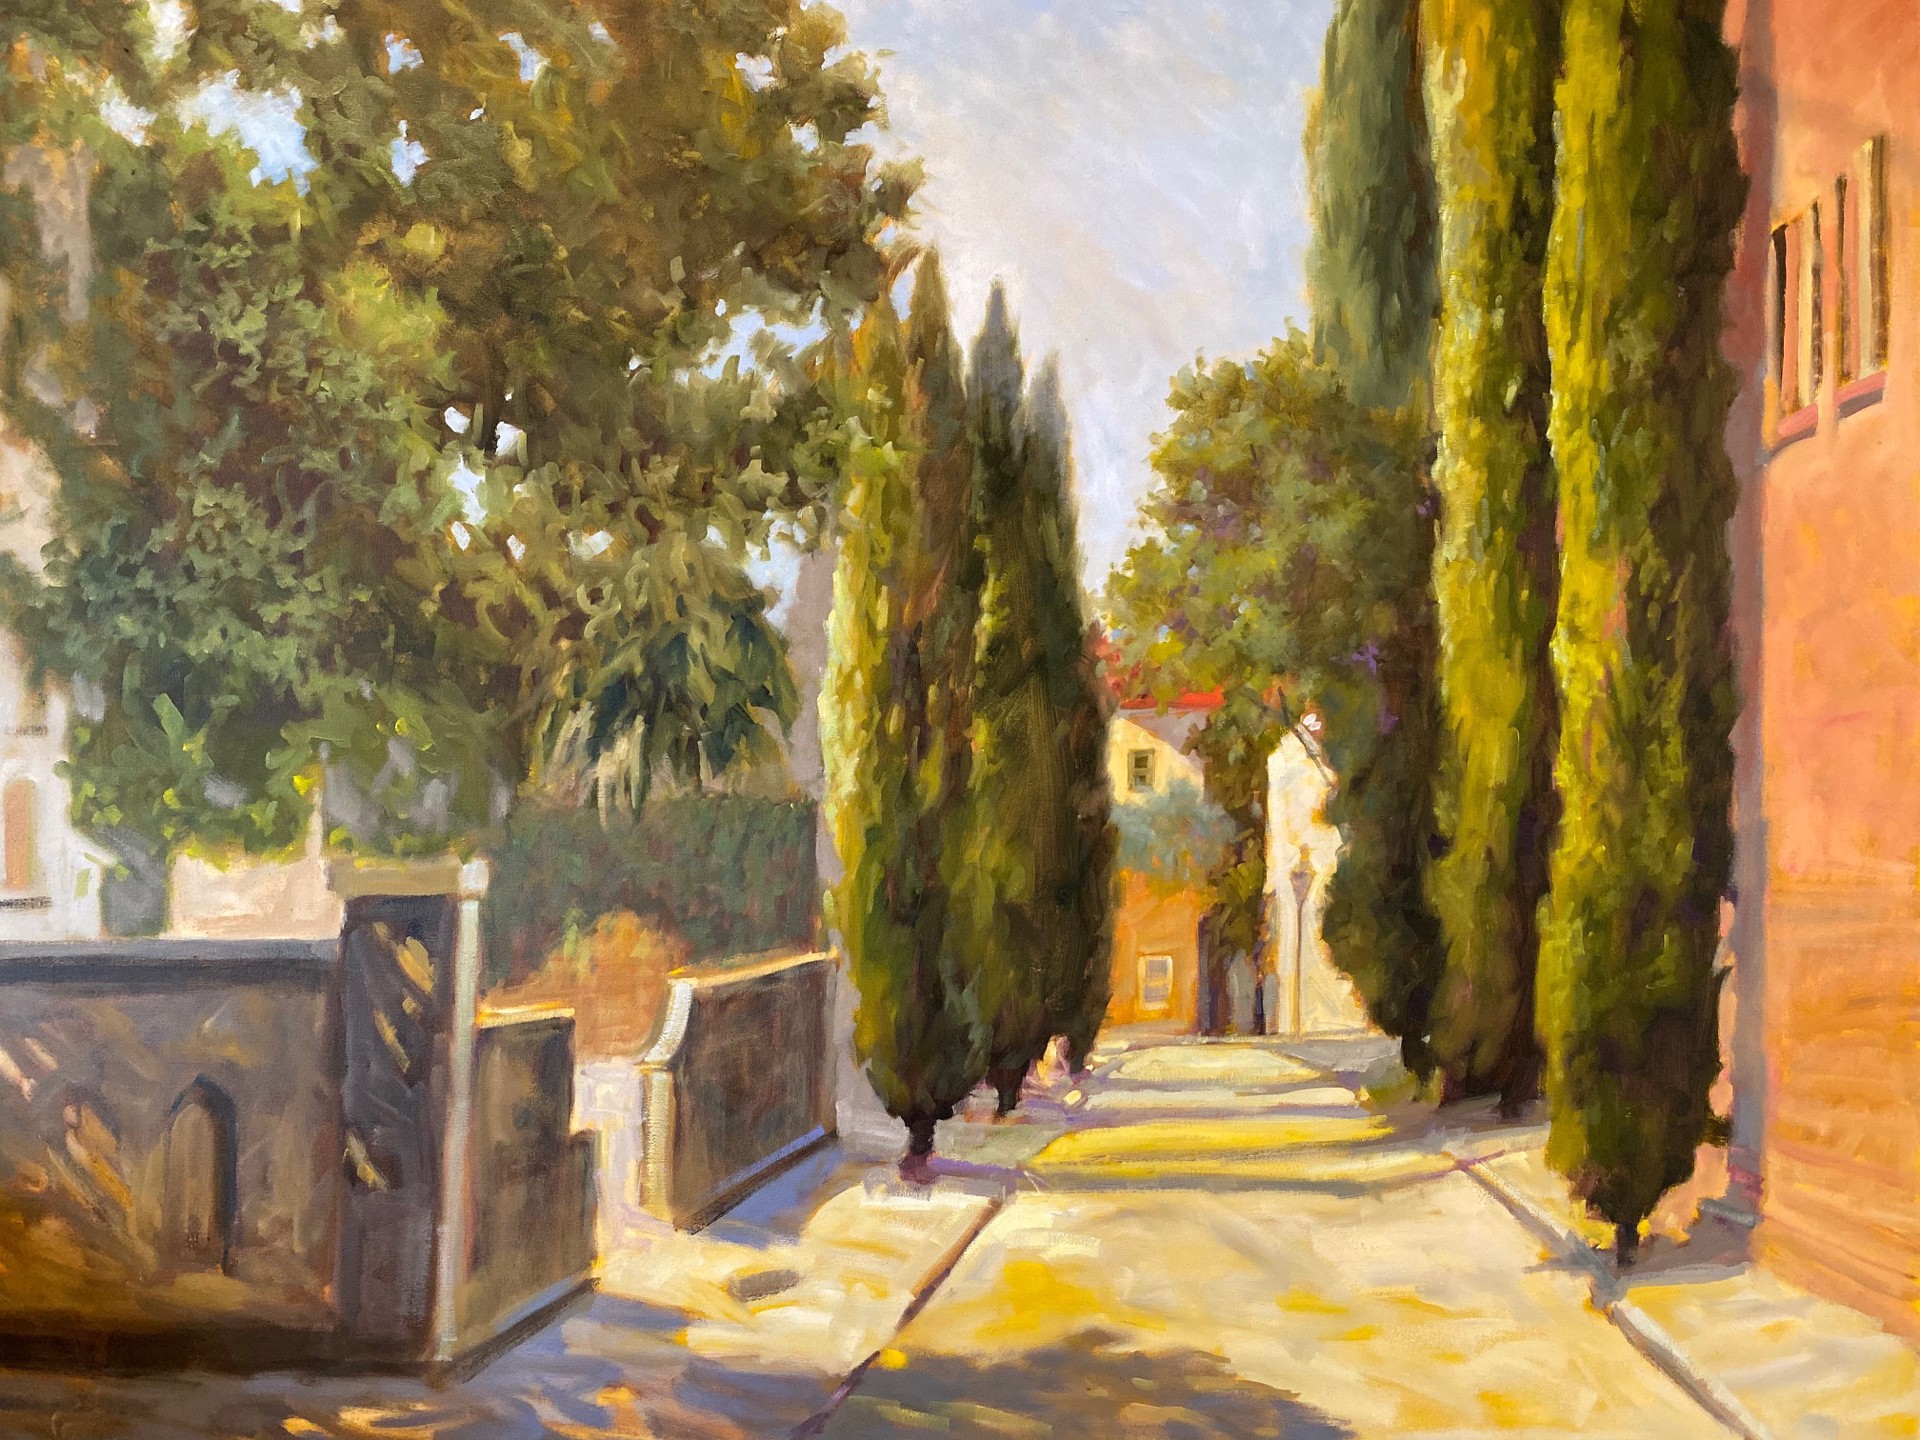 Cypress on St. Michael's Alley by Laurie Meyer